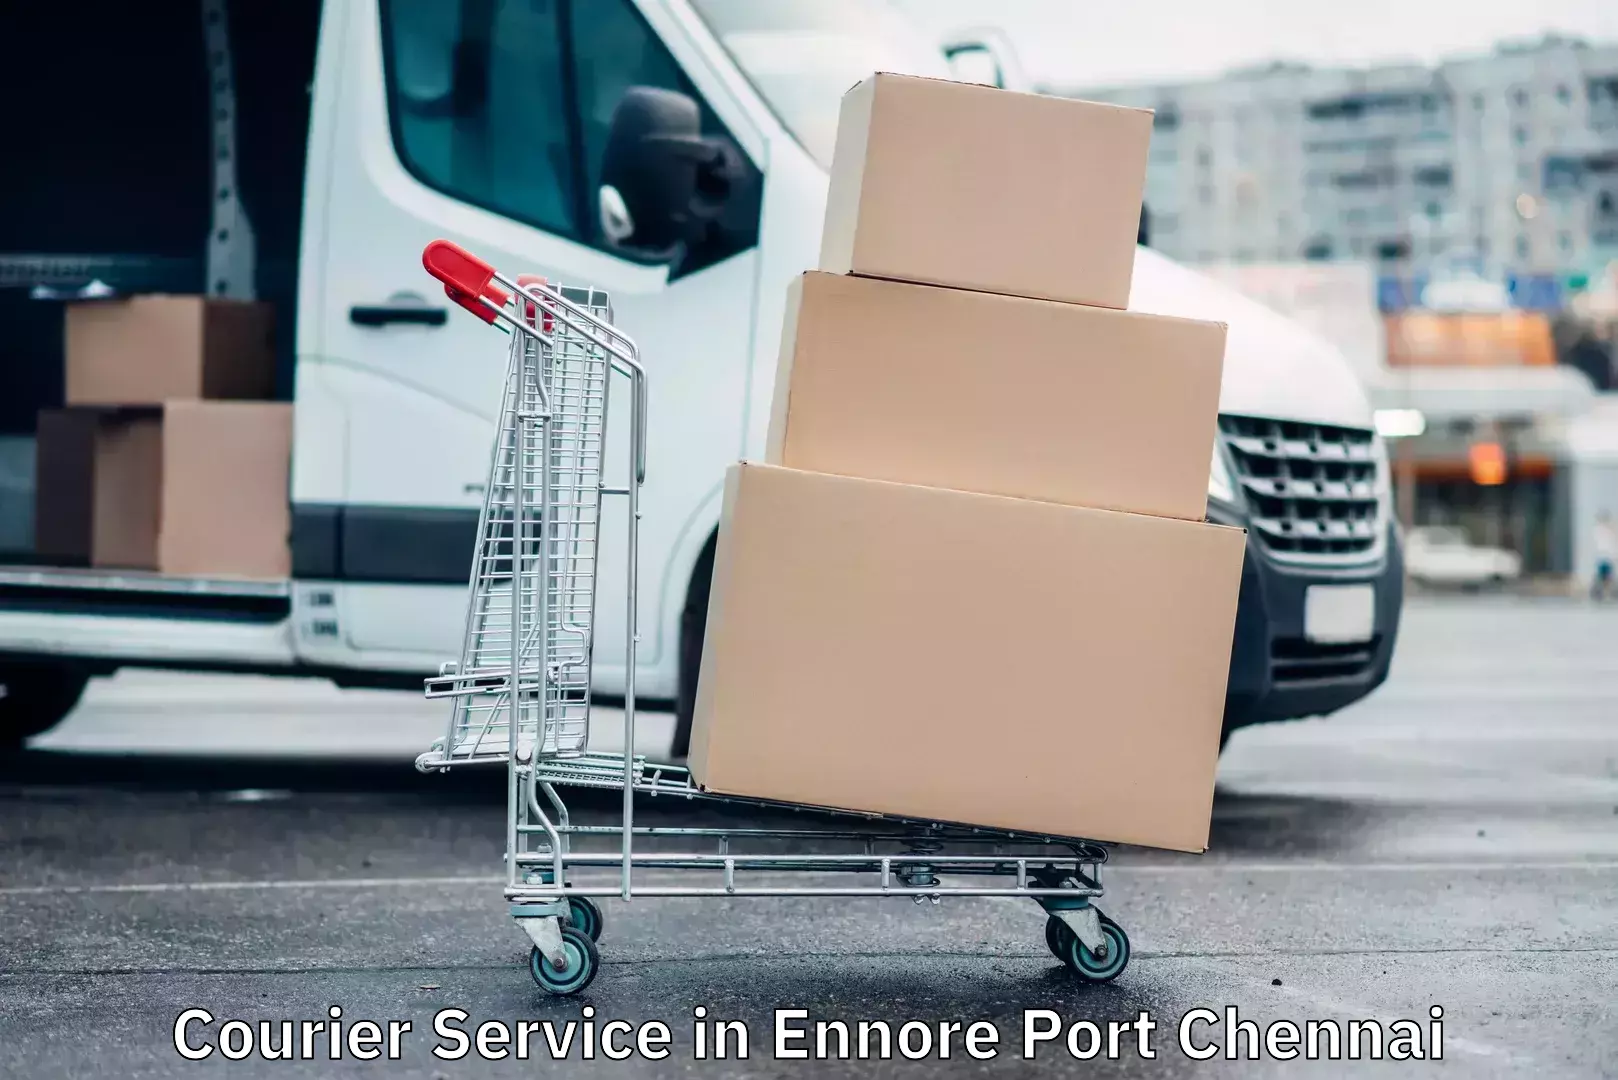 Customer-friendly courier services in Ennore Port Chennai